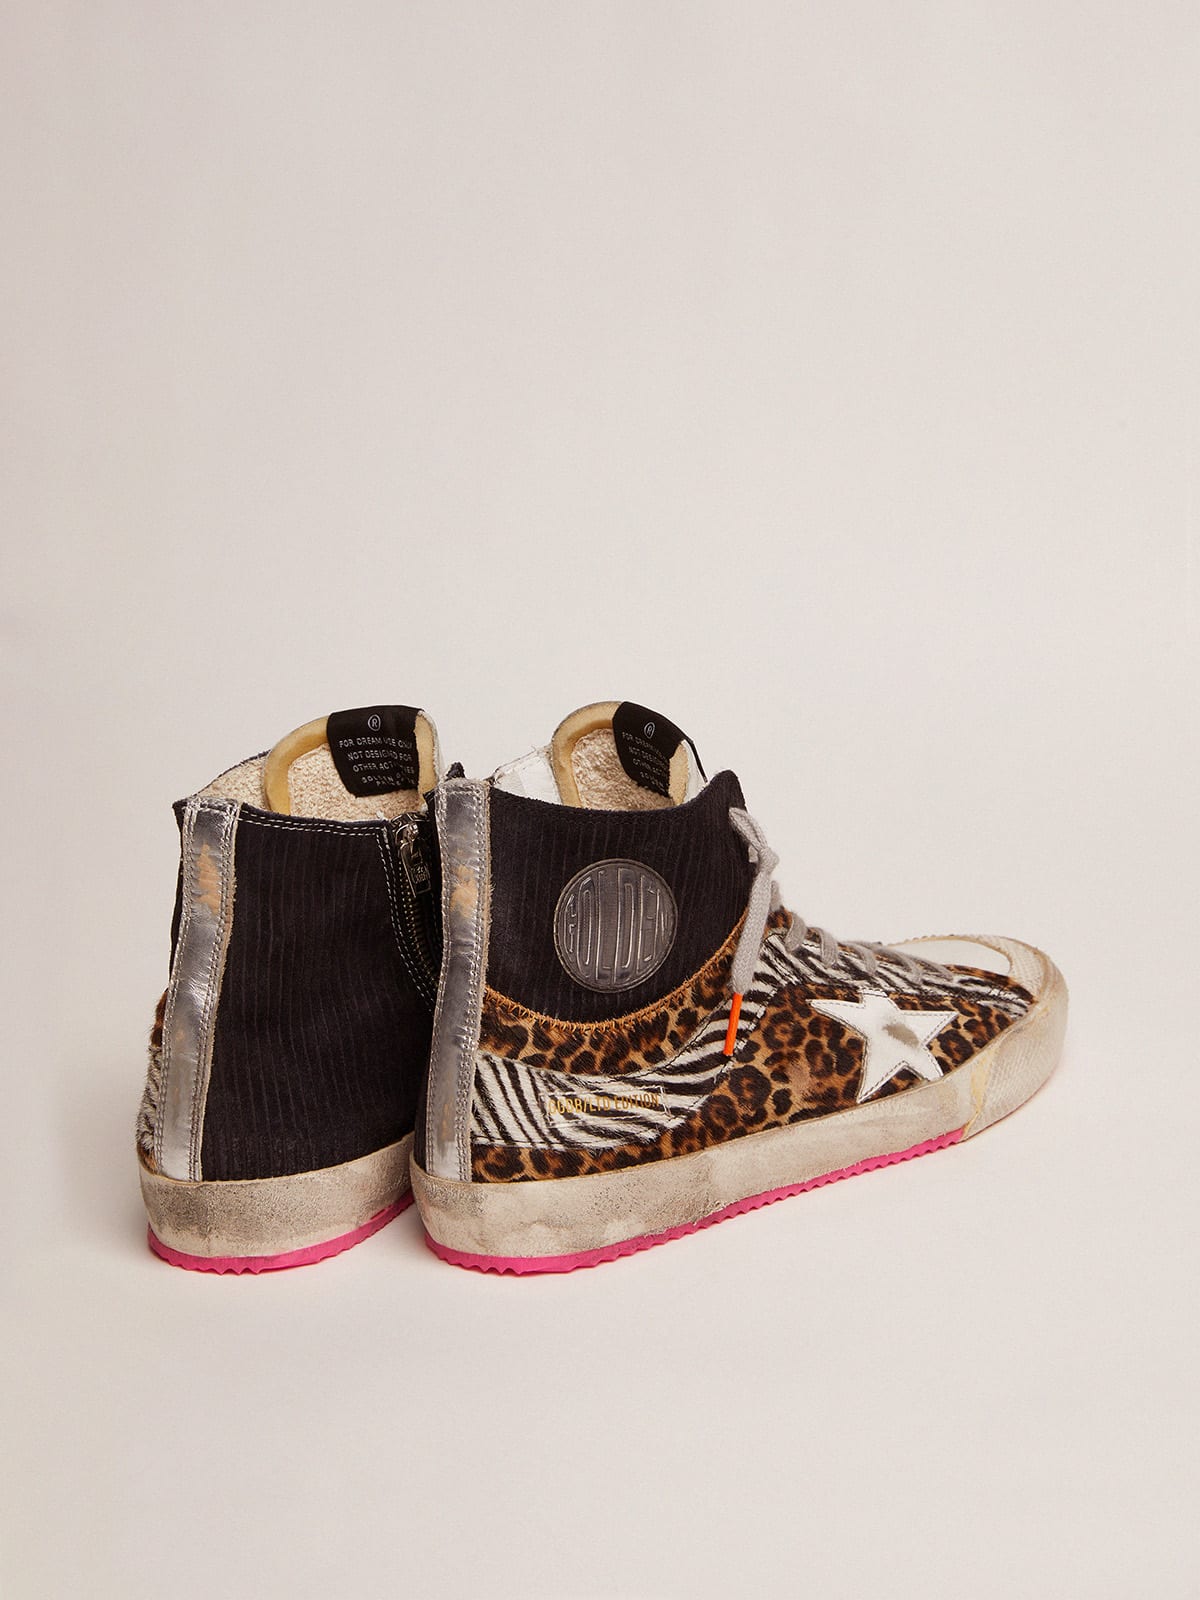 Golden Goose - Women’s Francy LAB sneakers with printed suede pony-skin upper in 